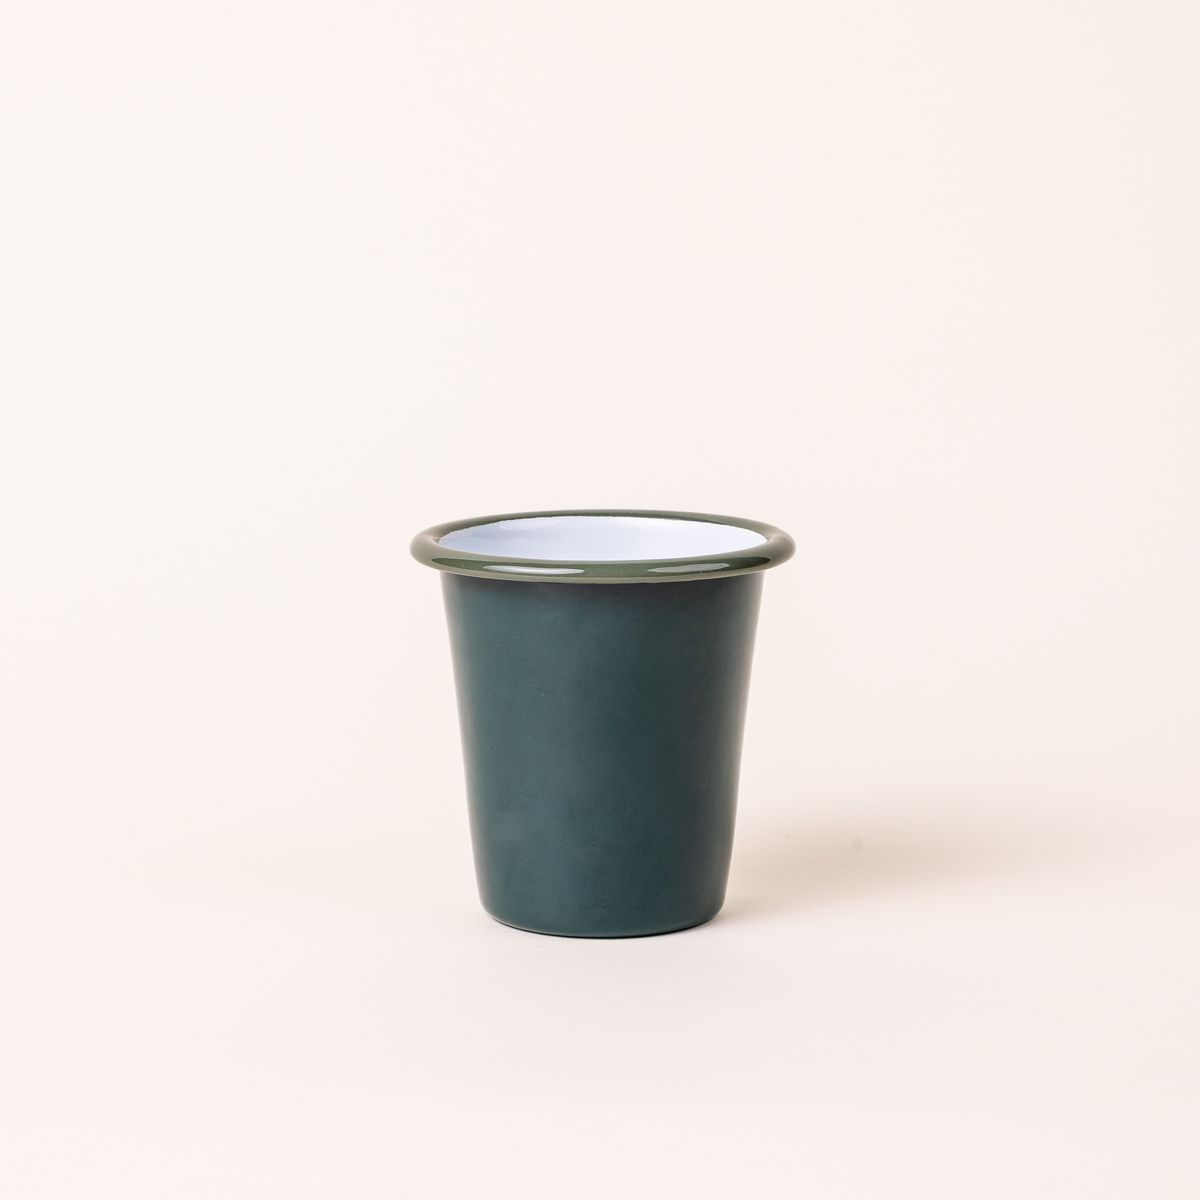 A short enamel cup with dark green teal exterior and white interior